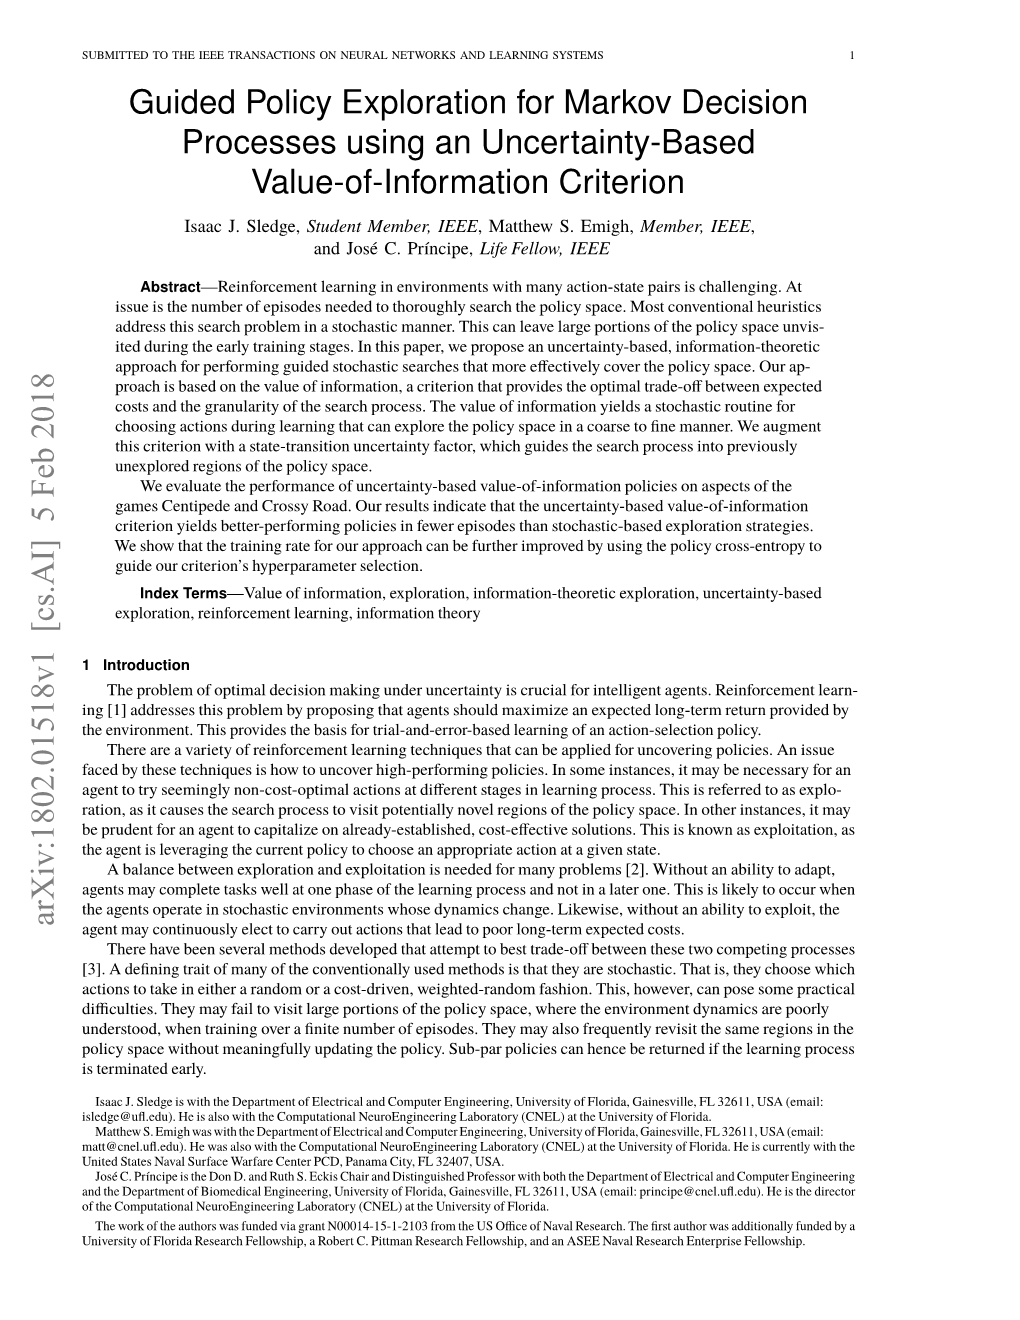 Guided Policy Exploration for Markov Decision Processes Using an Uncertainty-Based Value-Of-Information Criterion Isaac J